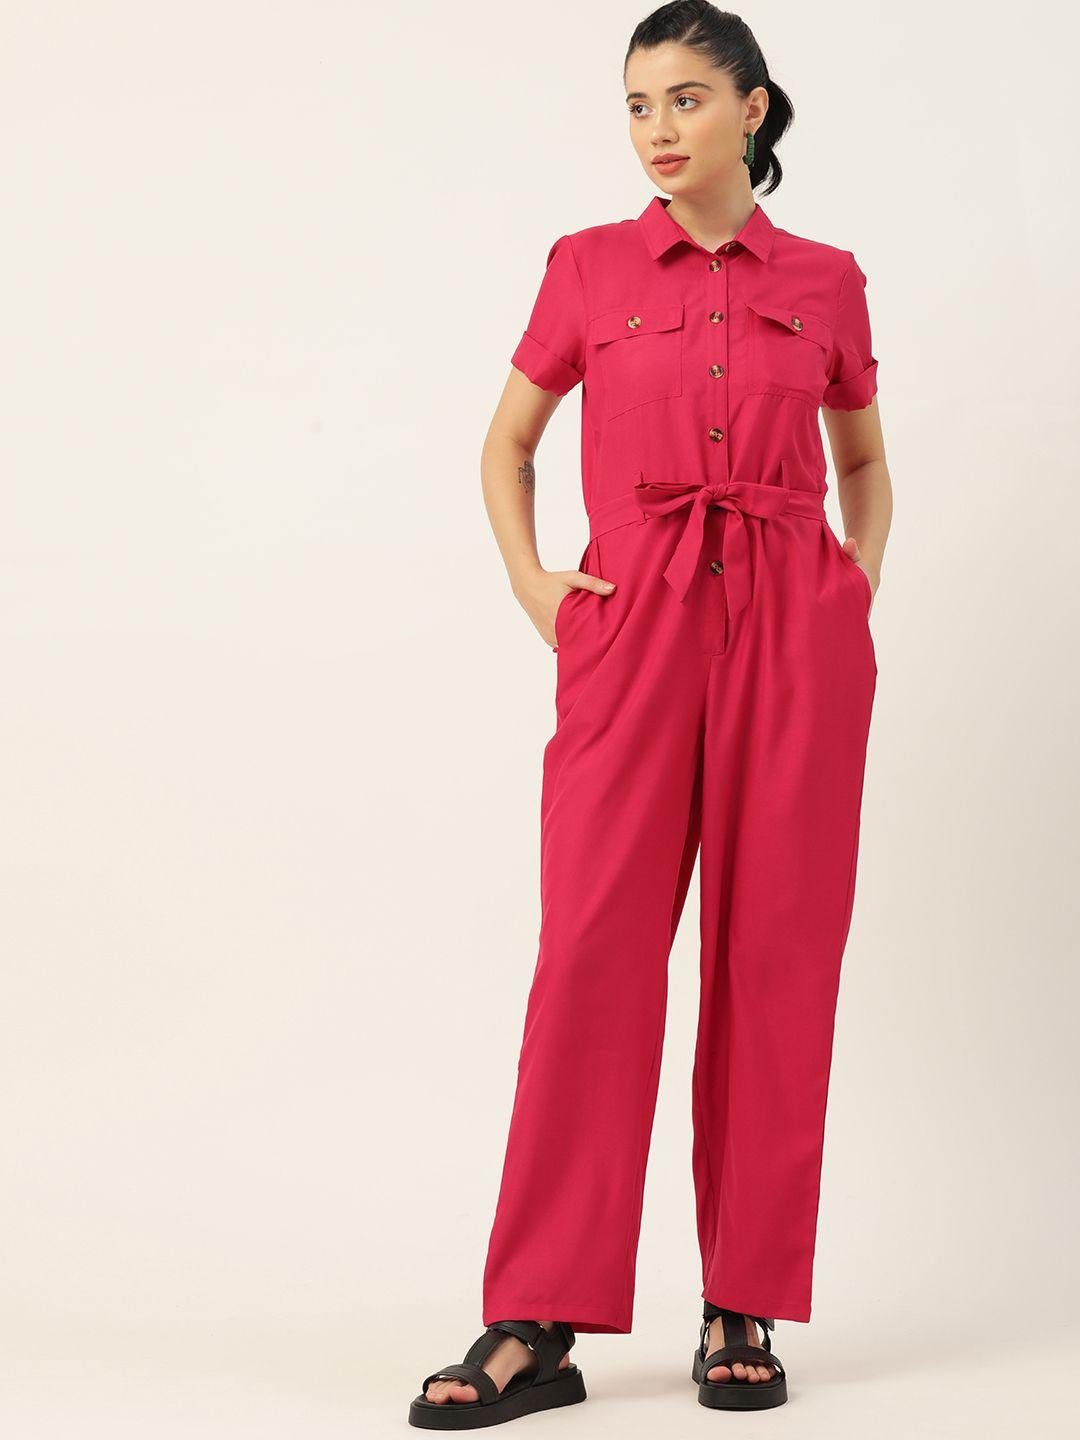 4wrd by dressberry fuchsia solid basic jumpsuit with tie-up belt